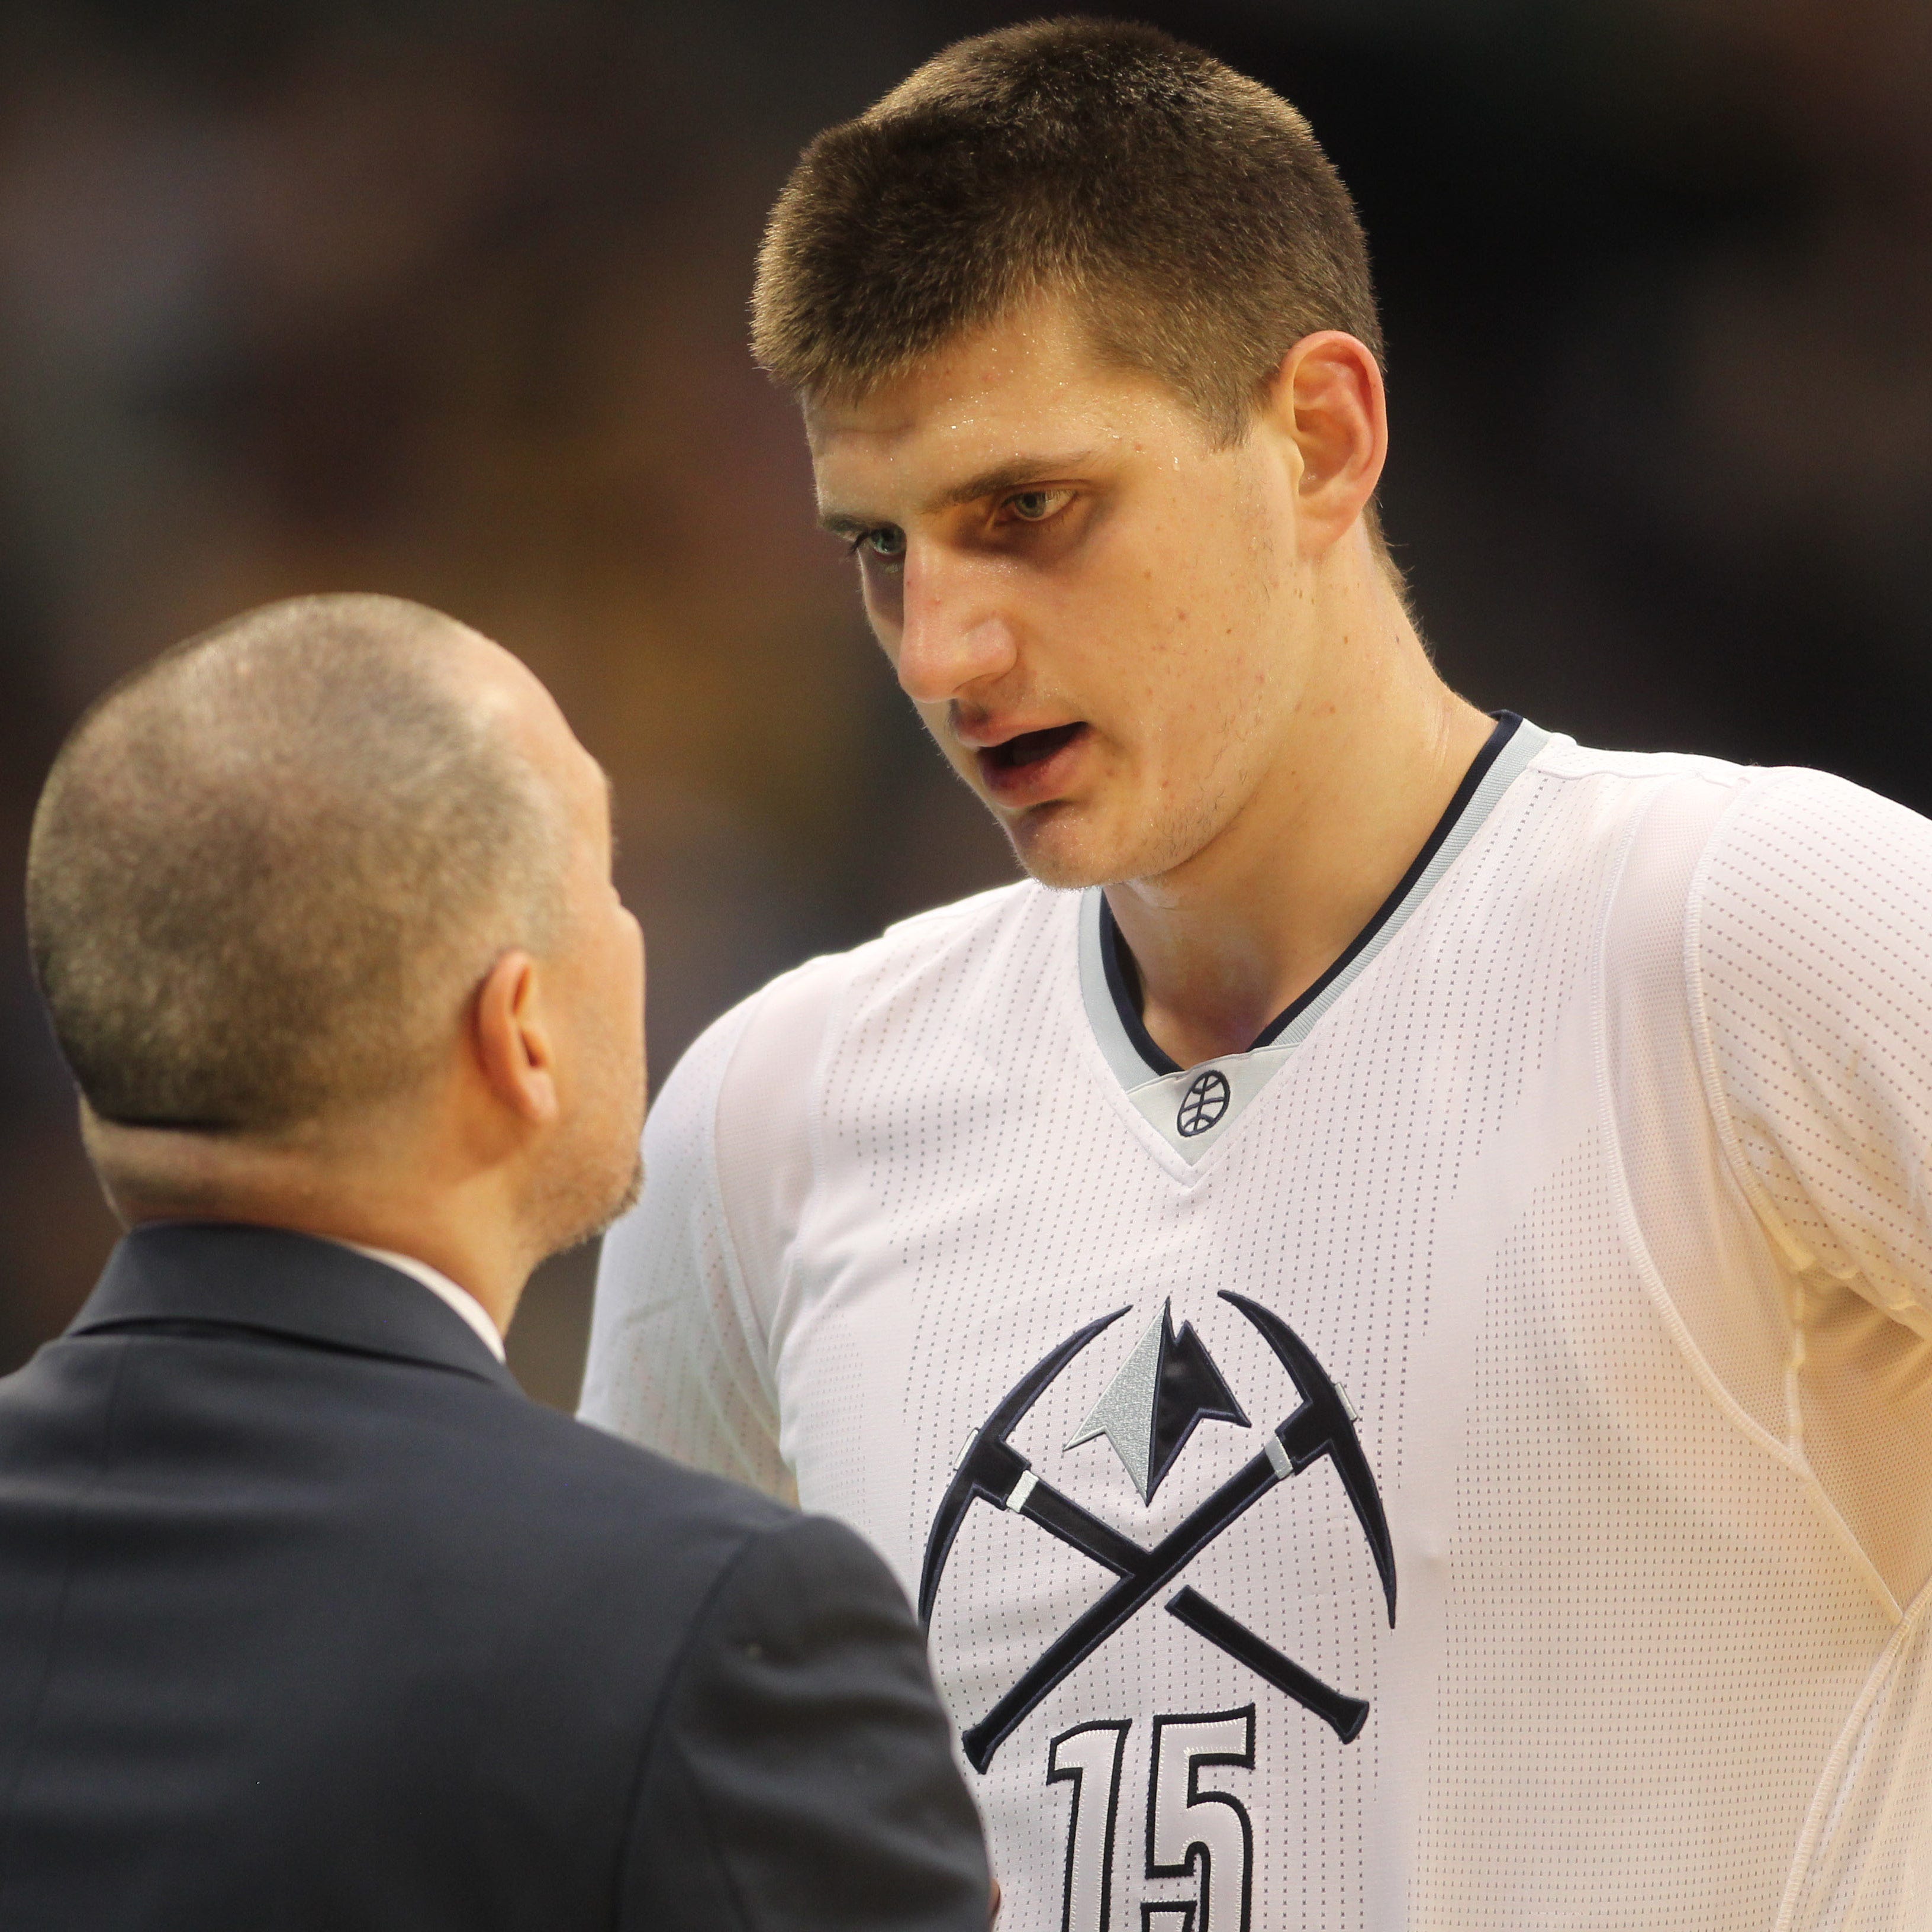 This file photo from Dec. 15, 2016 shows Nuggets coach Michael Malone, left, talking with Nikola Jokic during the first half of a regular-season game at Pepsi Center in Denver.